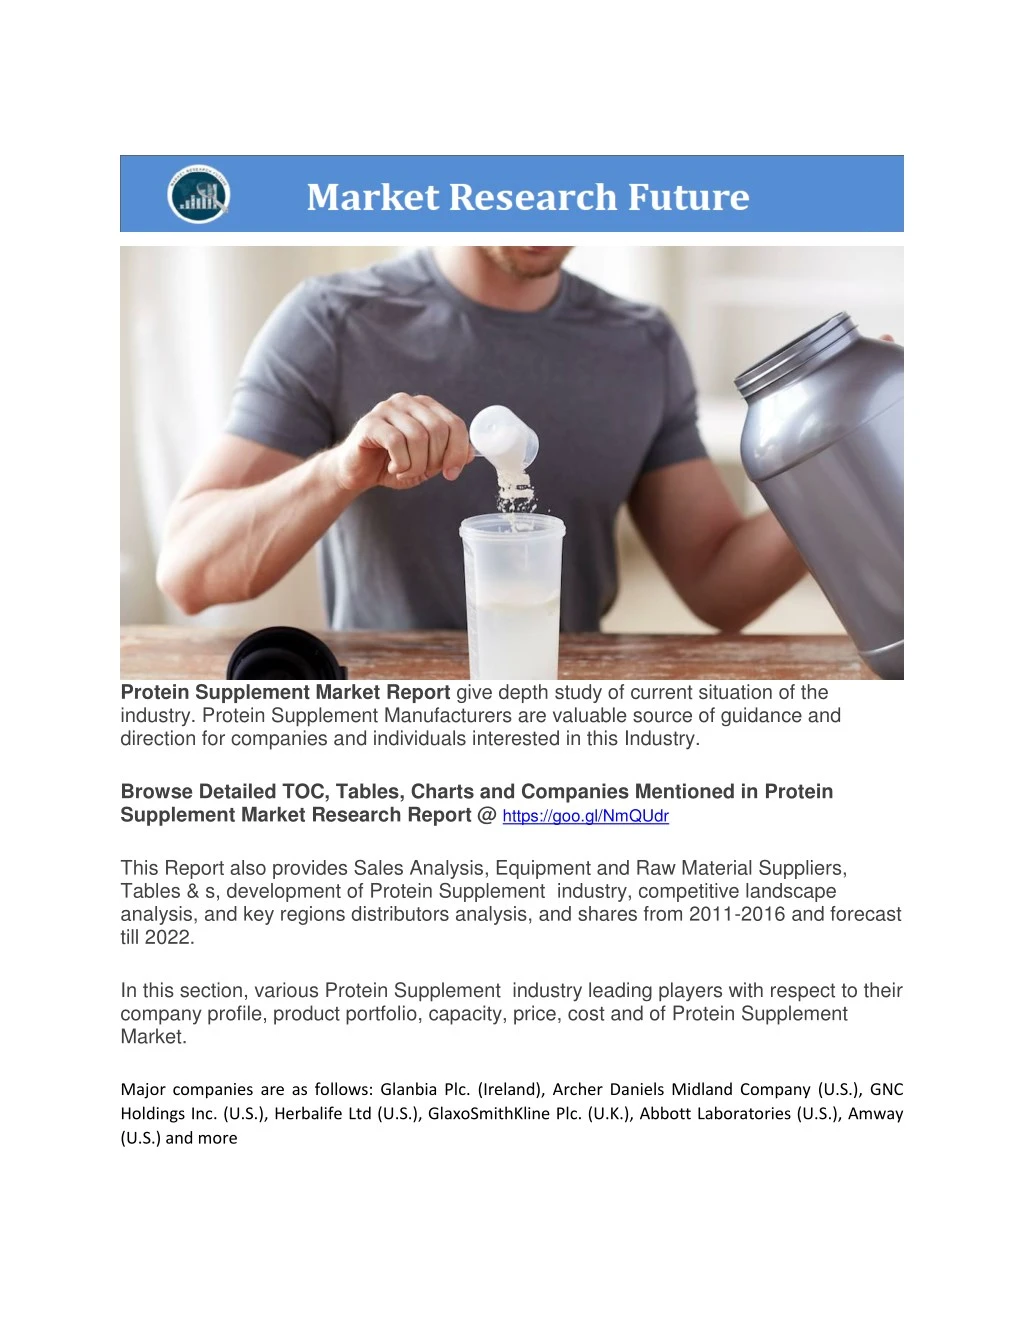 protein supplement market report give depth study